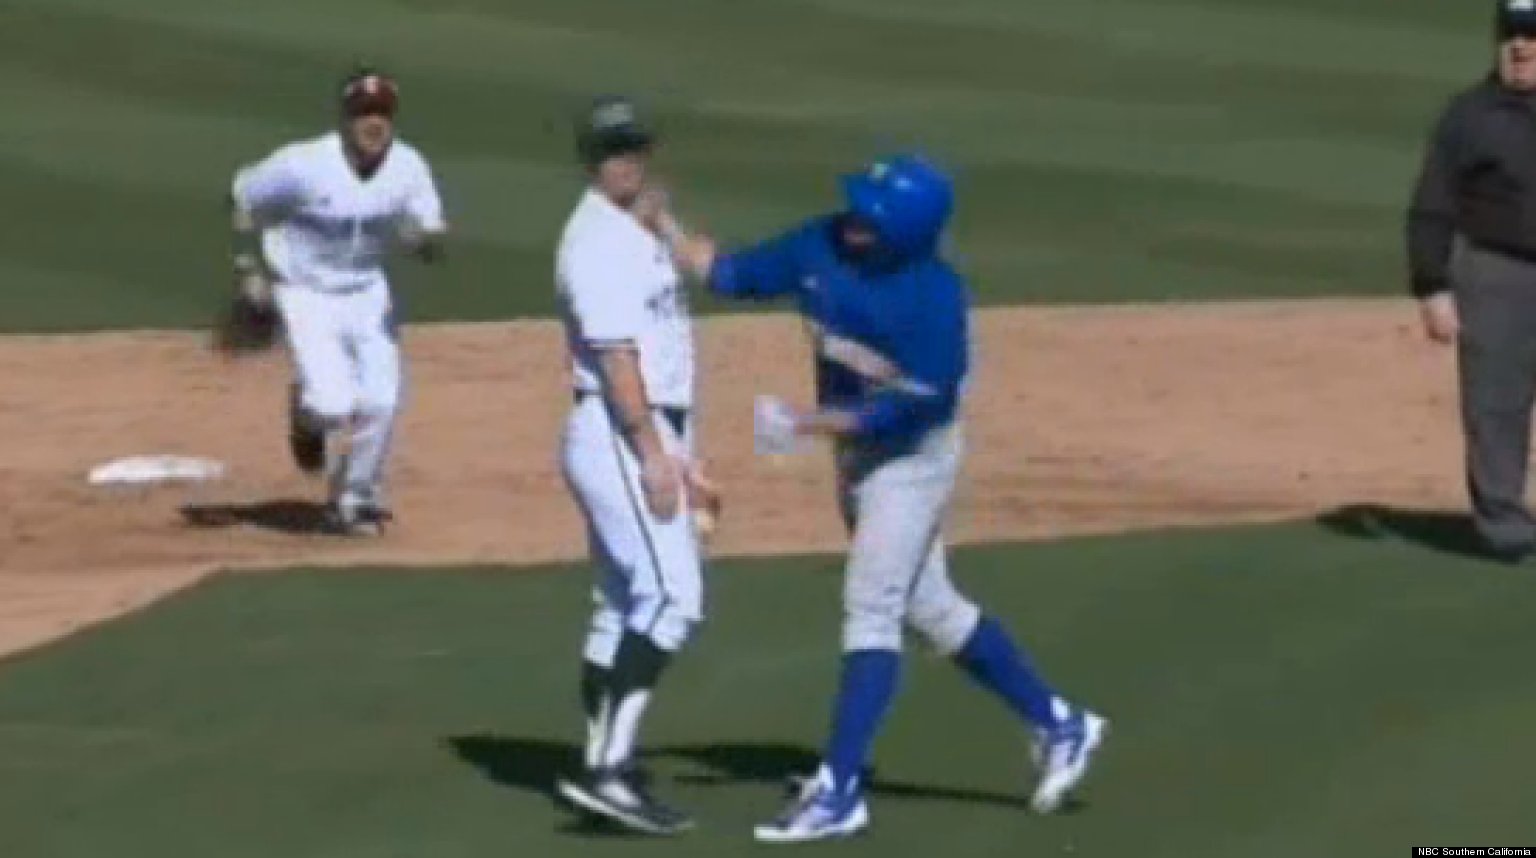 UC Riverside, Sacramento State Brawl: Fight Breaks Out During College Baseball Game ...